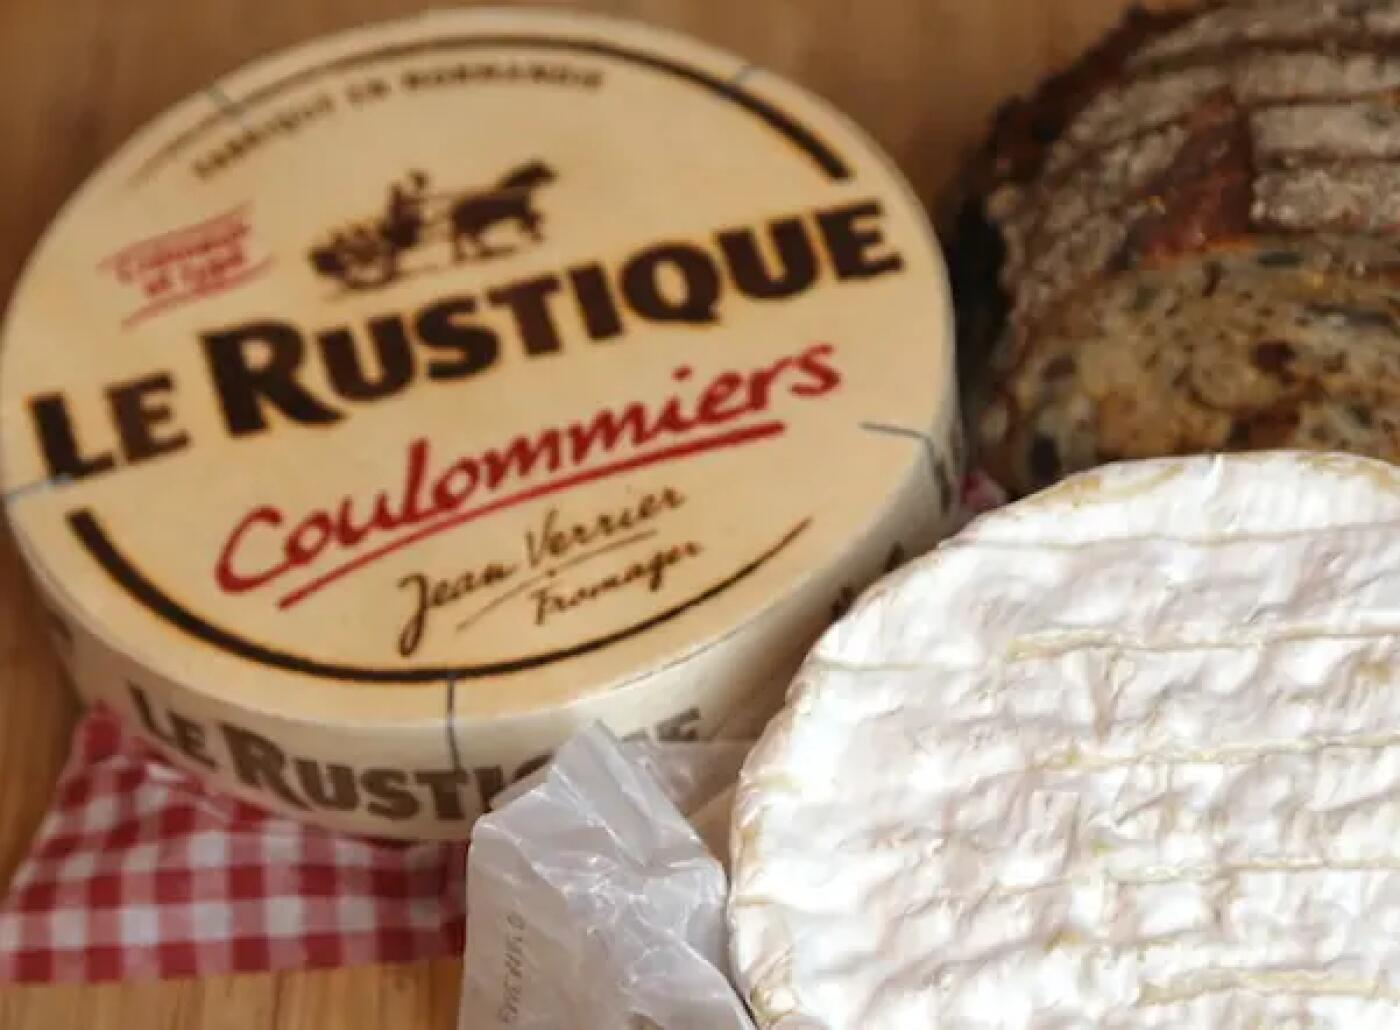 Fabrication: Coulommiers Le Rustique®